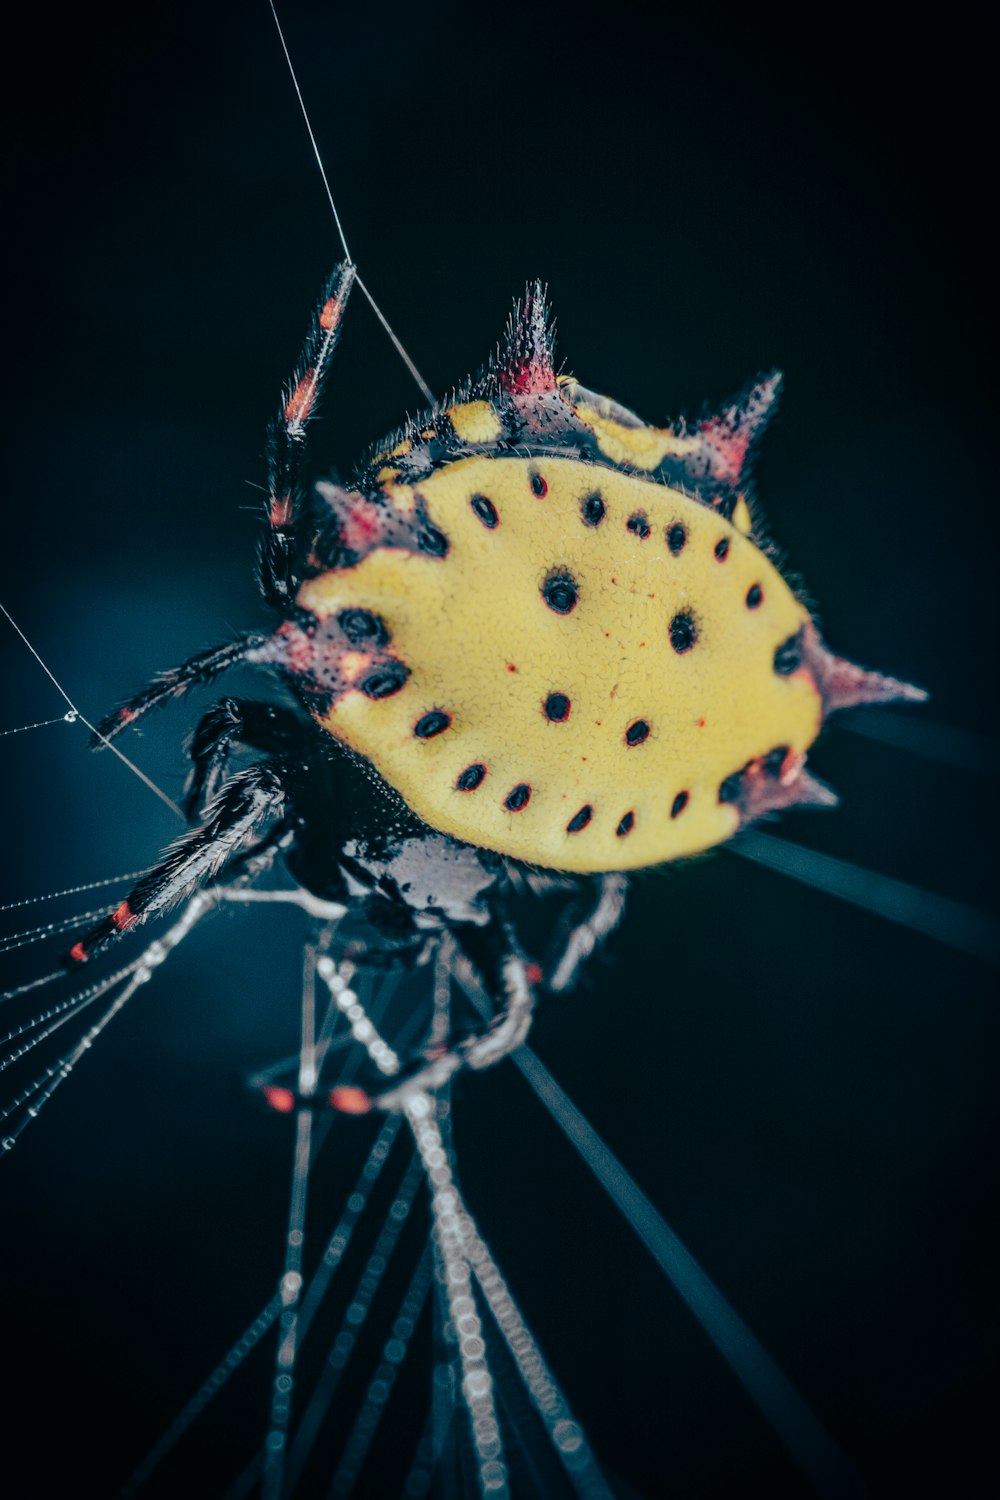 yellow and black spider on web in close up photography